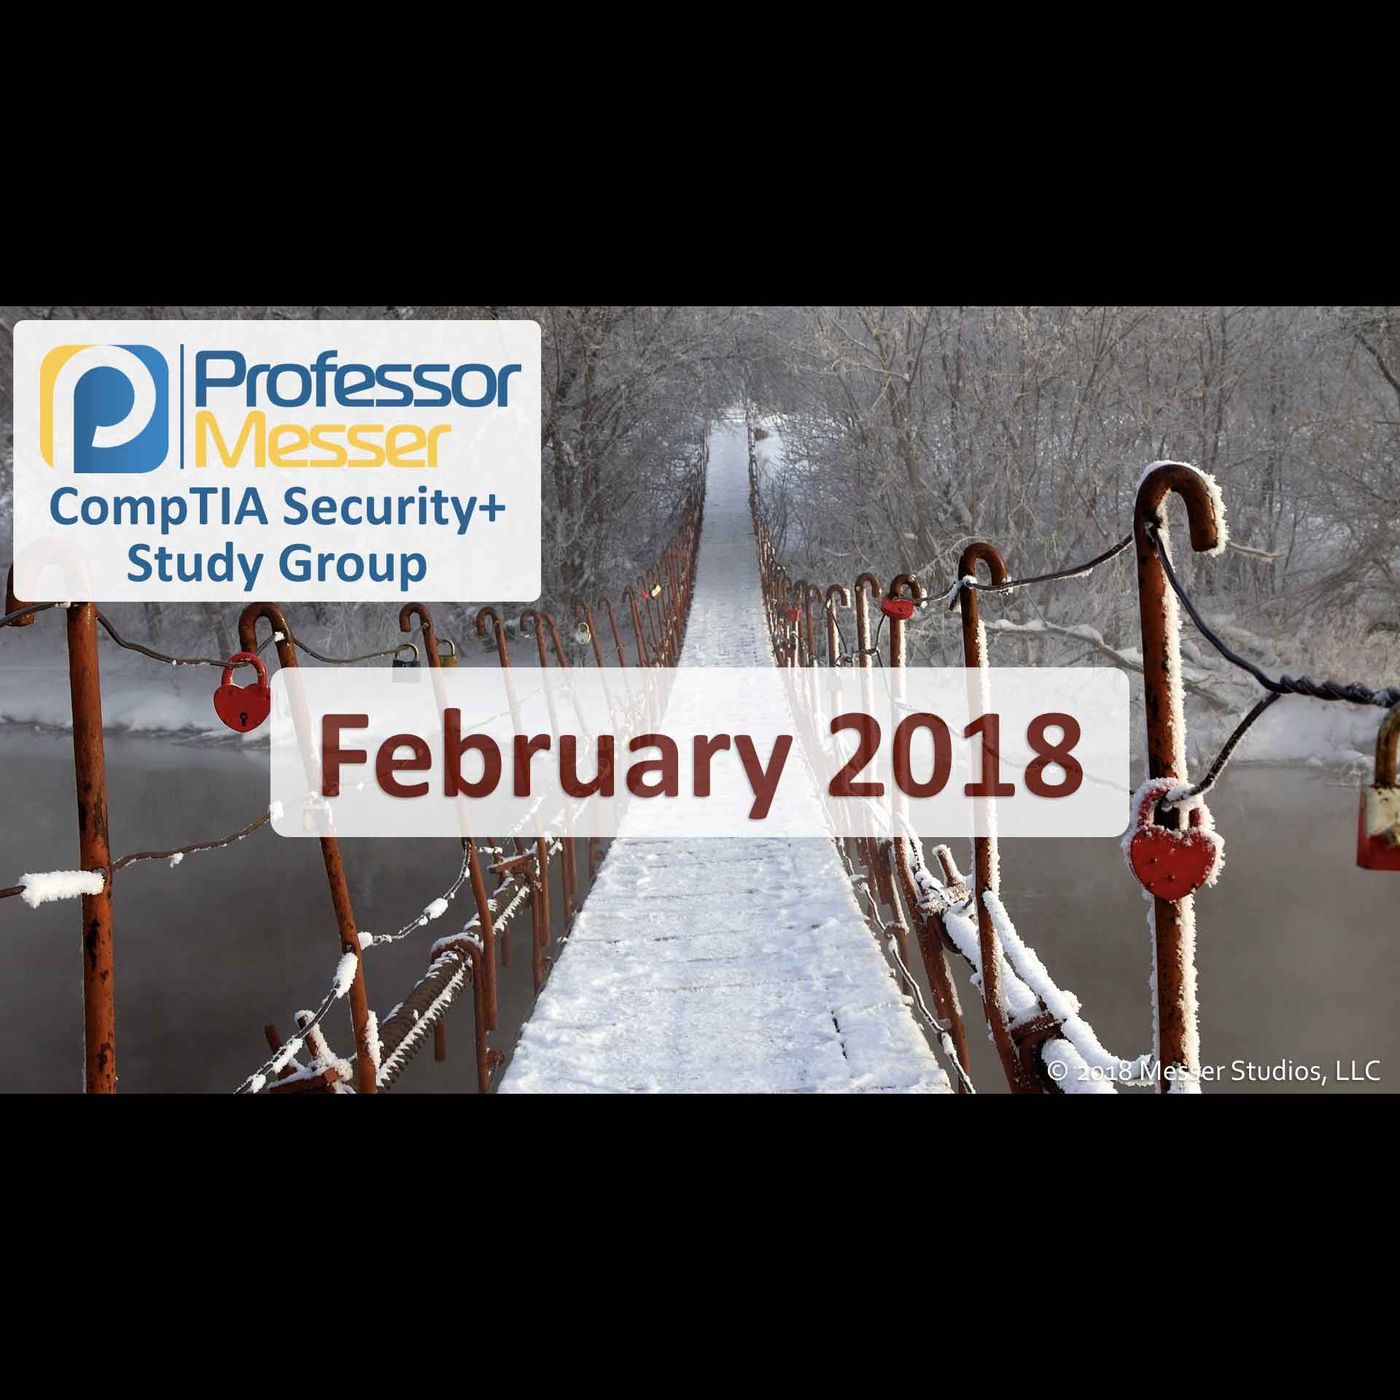 Professor Messer's Security+ Study Group - February 2018